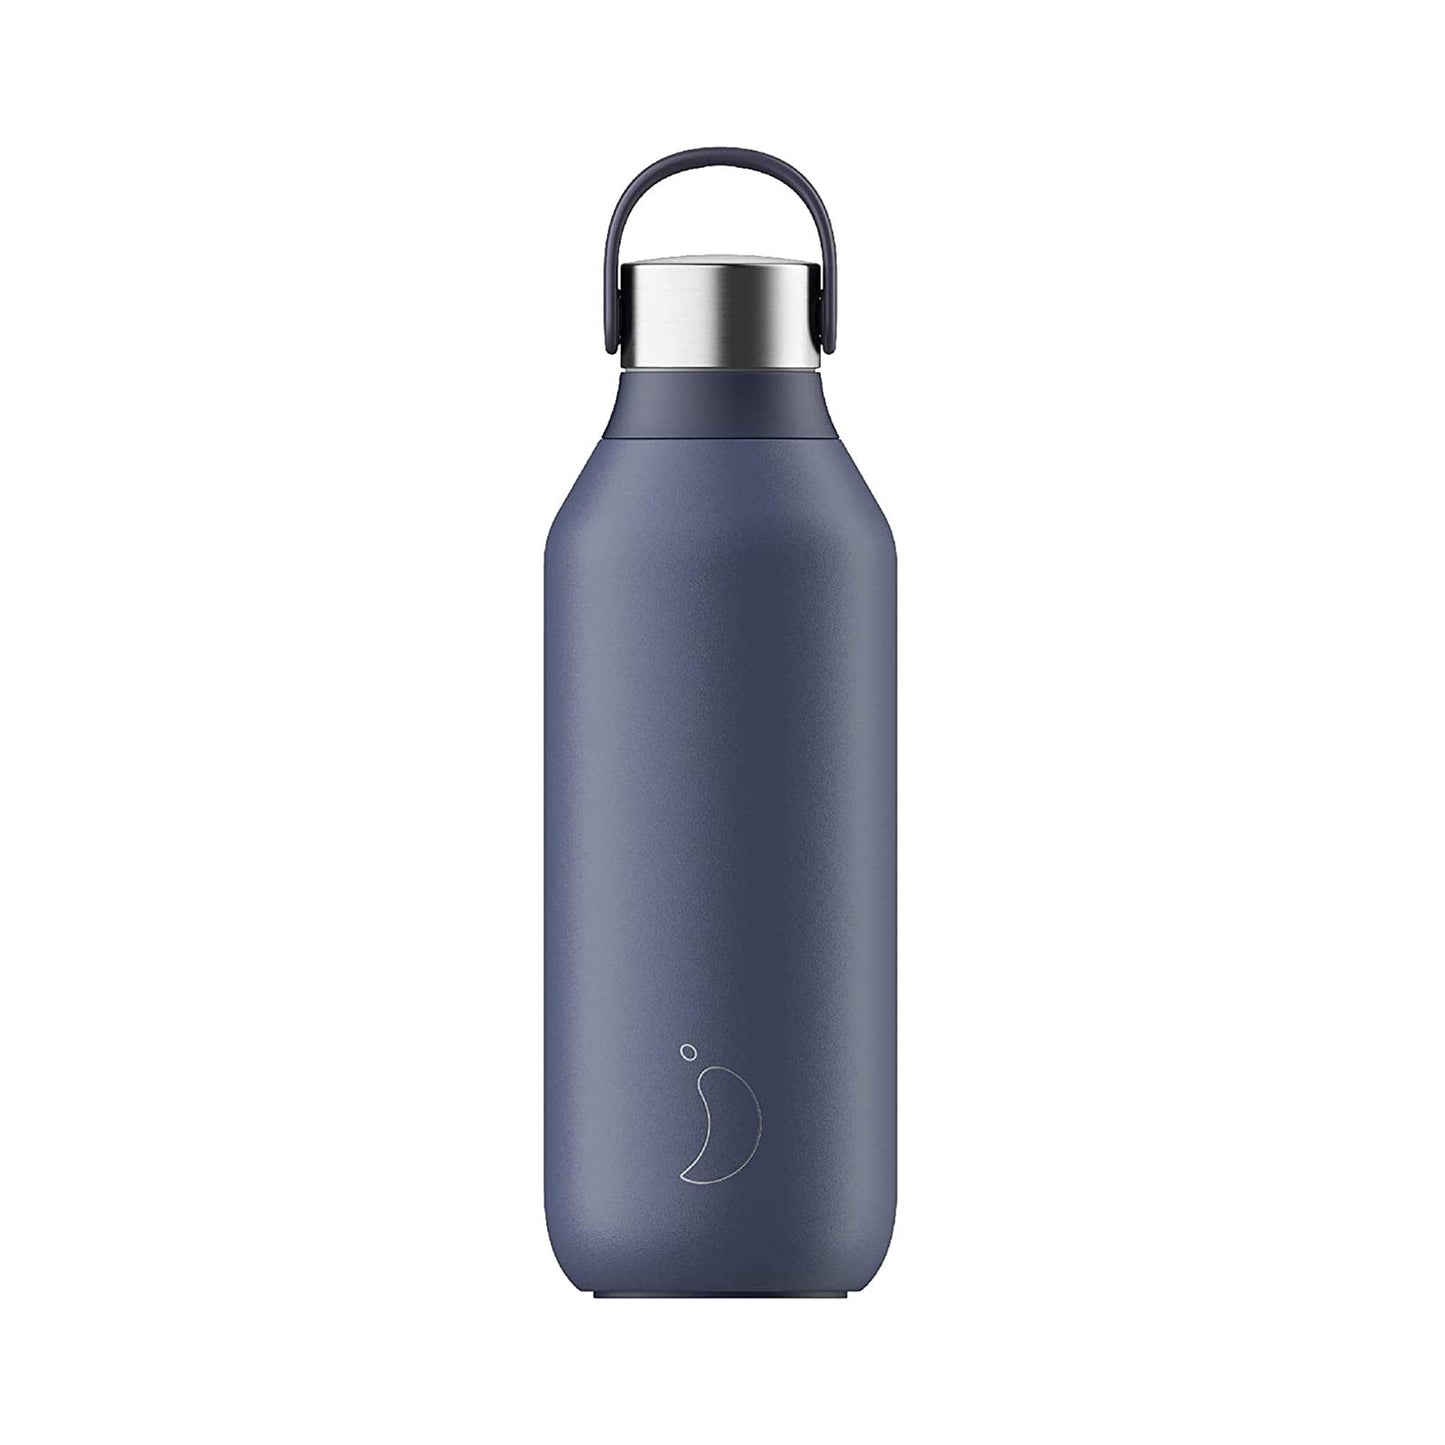 Chilly's Water Bottles Chilly’s 500ml Series 2 Stainless Steel Water Bottle - Whale Blue